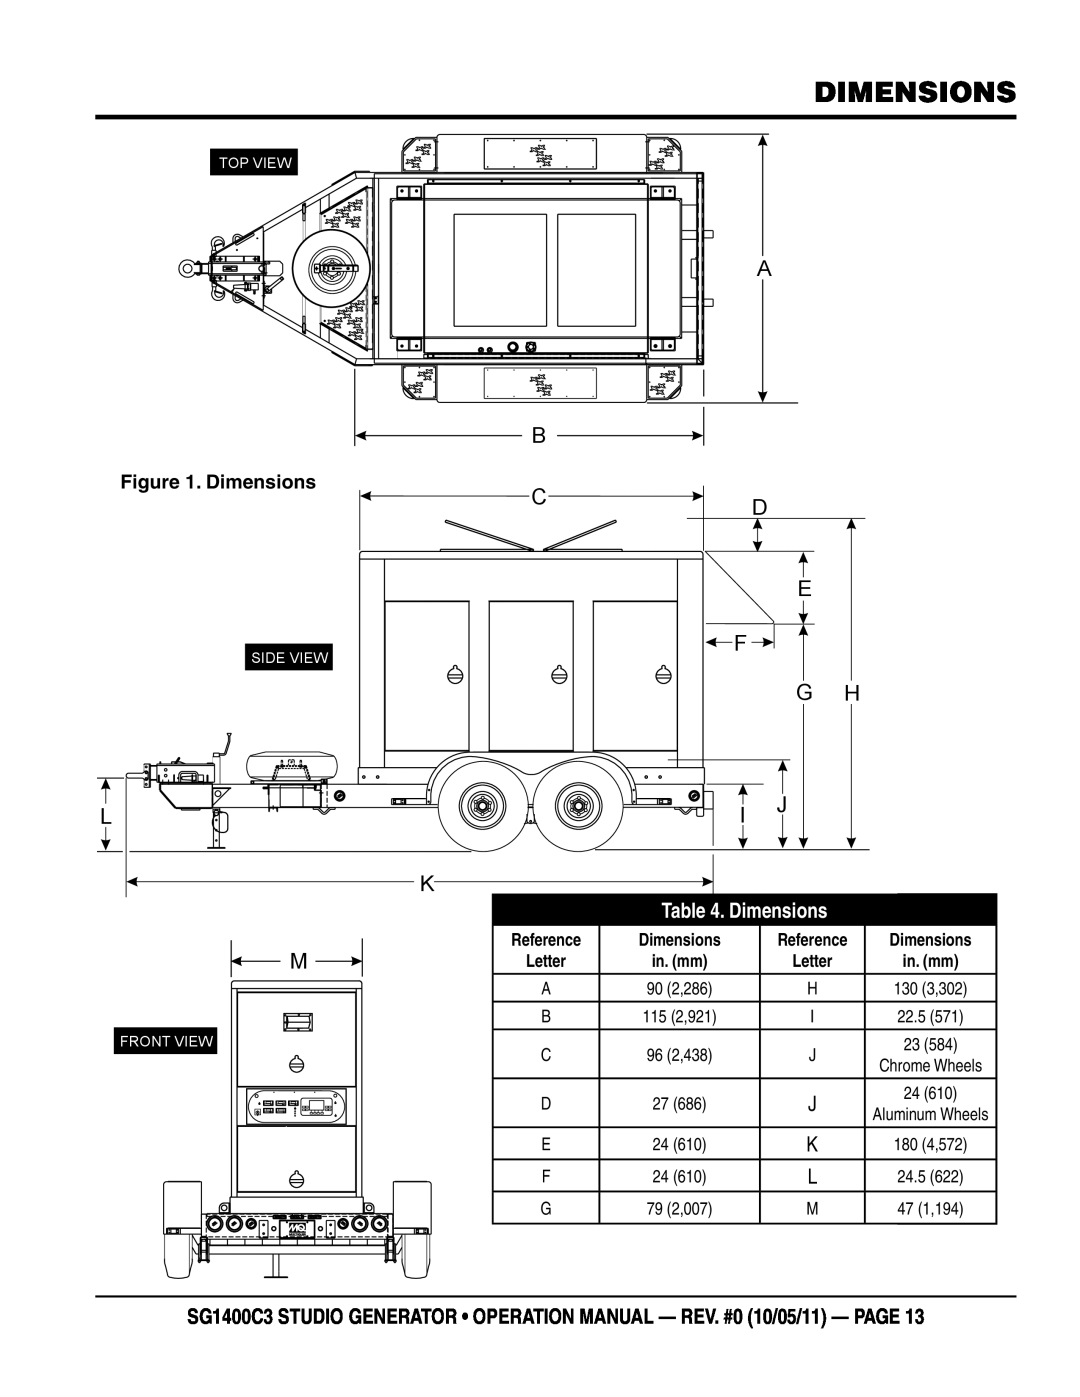 Multiquip SG1400C3 operation manual dimensions, L K M, E F G H I J, Dimensions, Top View, Side View, Front View 